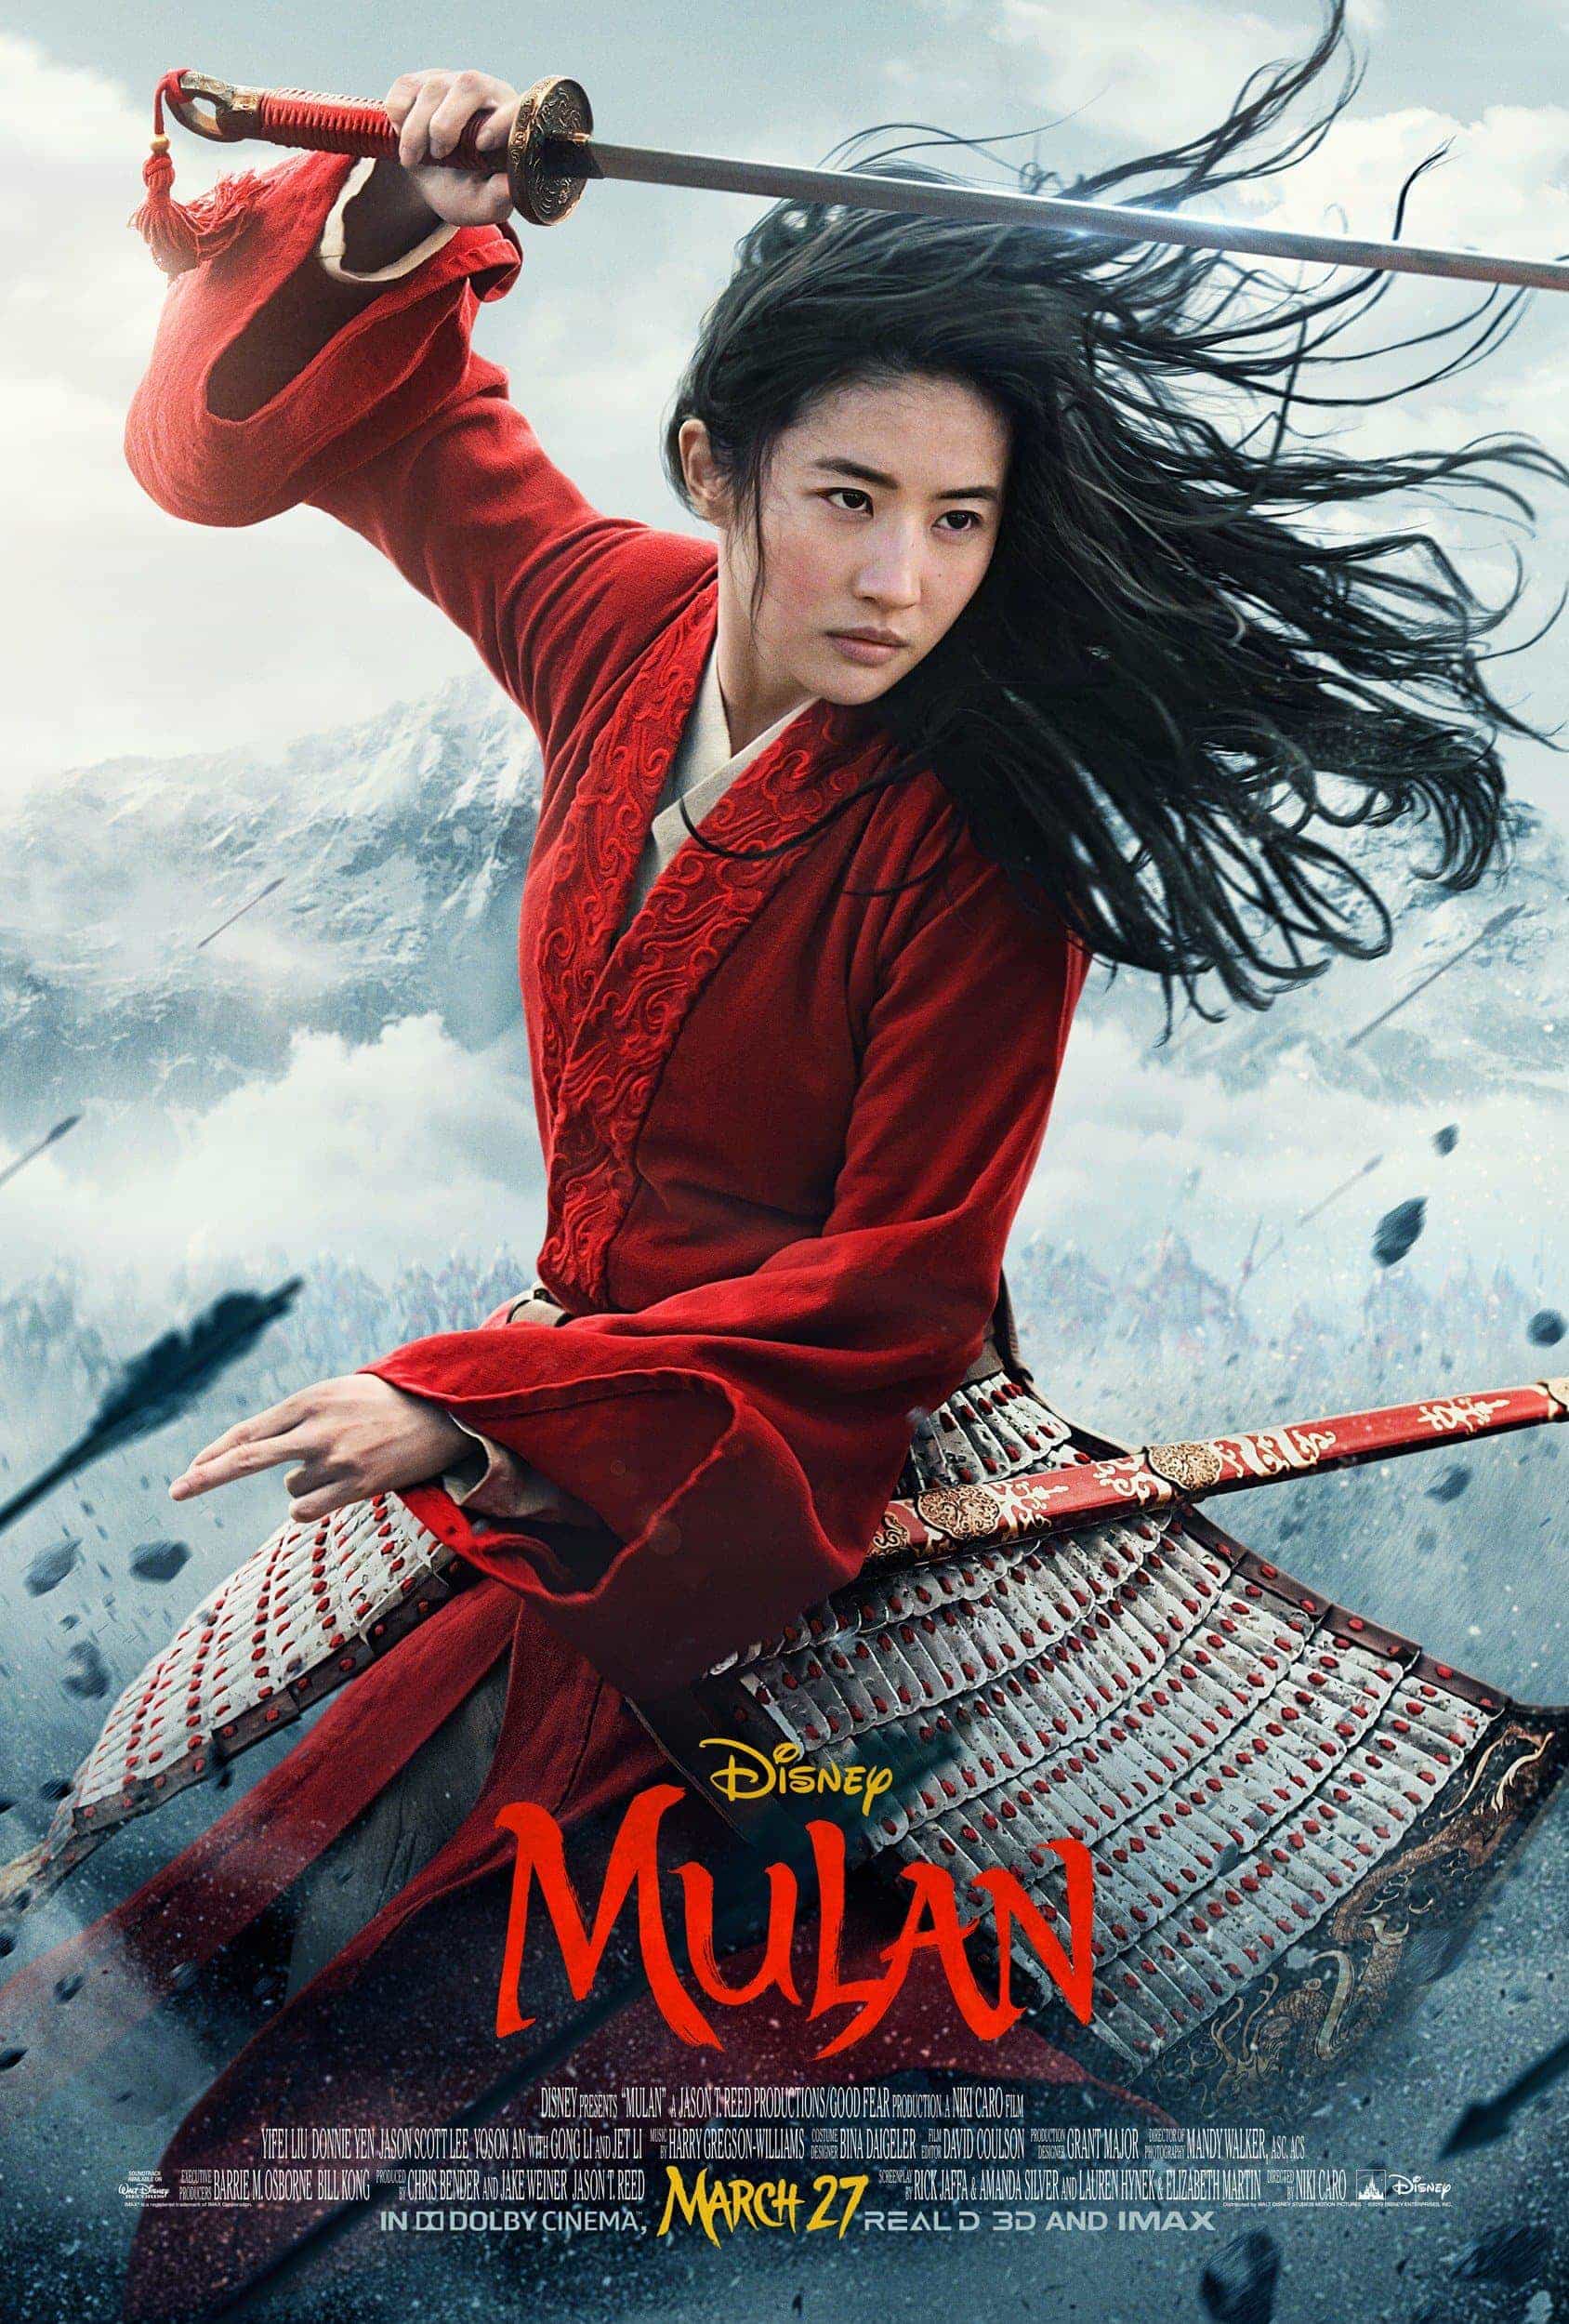 Disney announce Mulan live action will be released on Disney+ in America